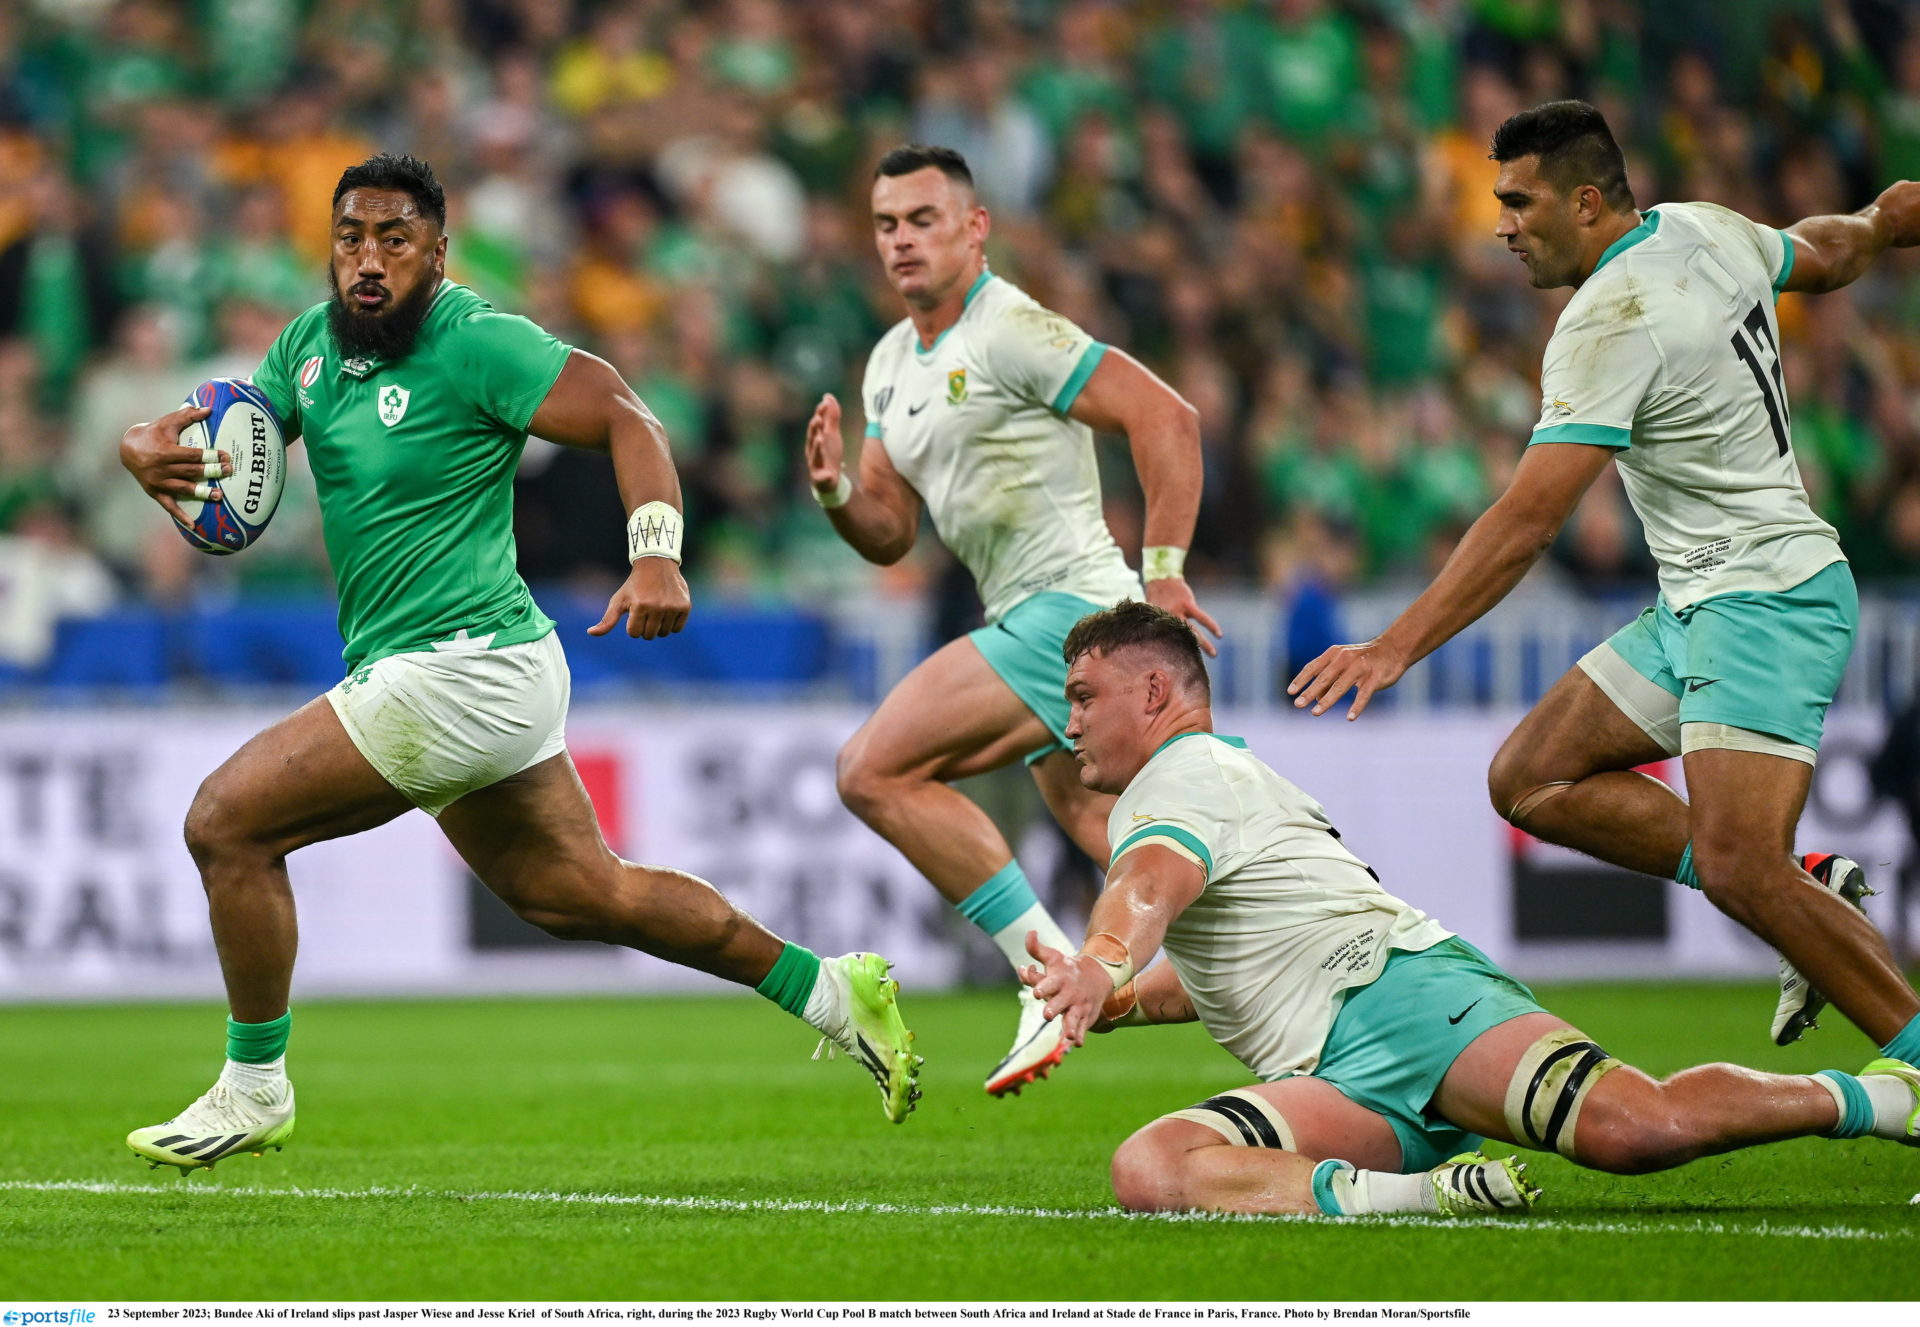 Ireland remains top of global ranking following win against South Africa Newstalk